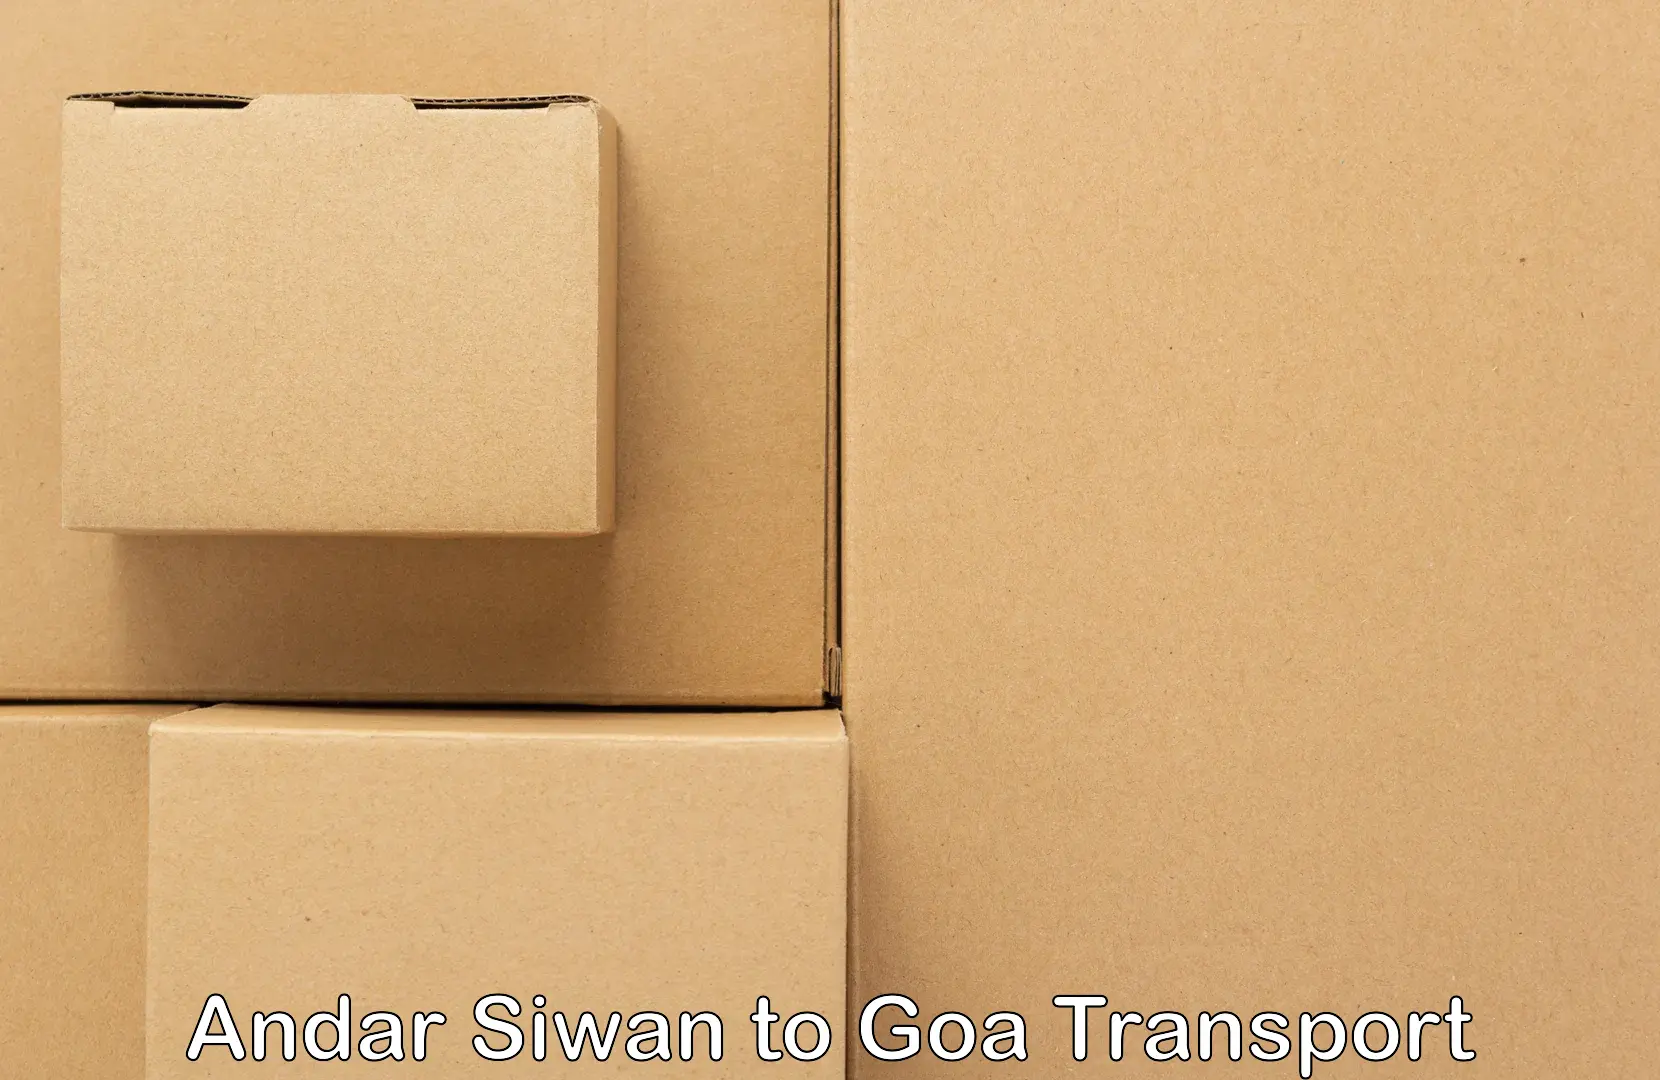 Air freight transport services Andar Siwan to Mormugao Port